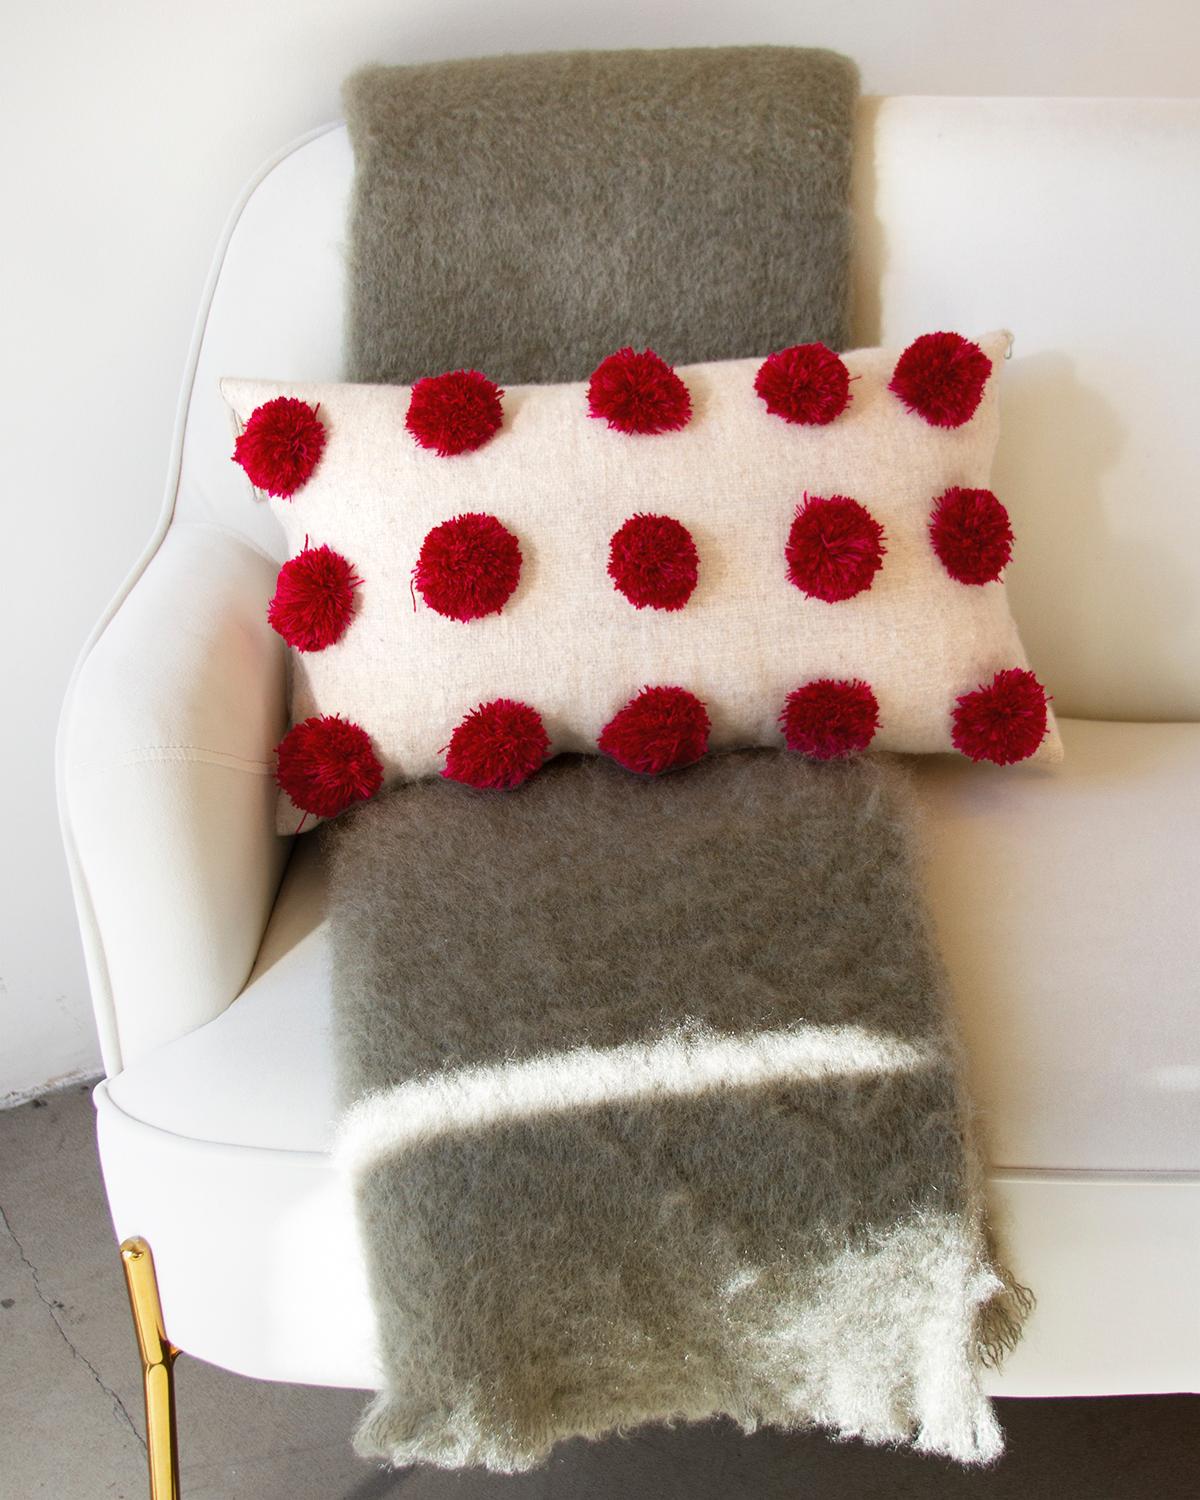 Add some subtle and elegant holiday vides to your home decor
This lumbar pillow from Chamula blends rustic charm with subtle holiday cheer. Crafted from wool, it features a white base with red pompom accents, ideal for seasonal decorating and